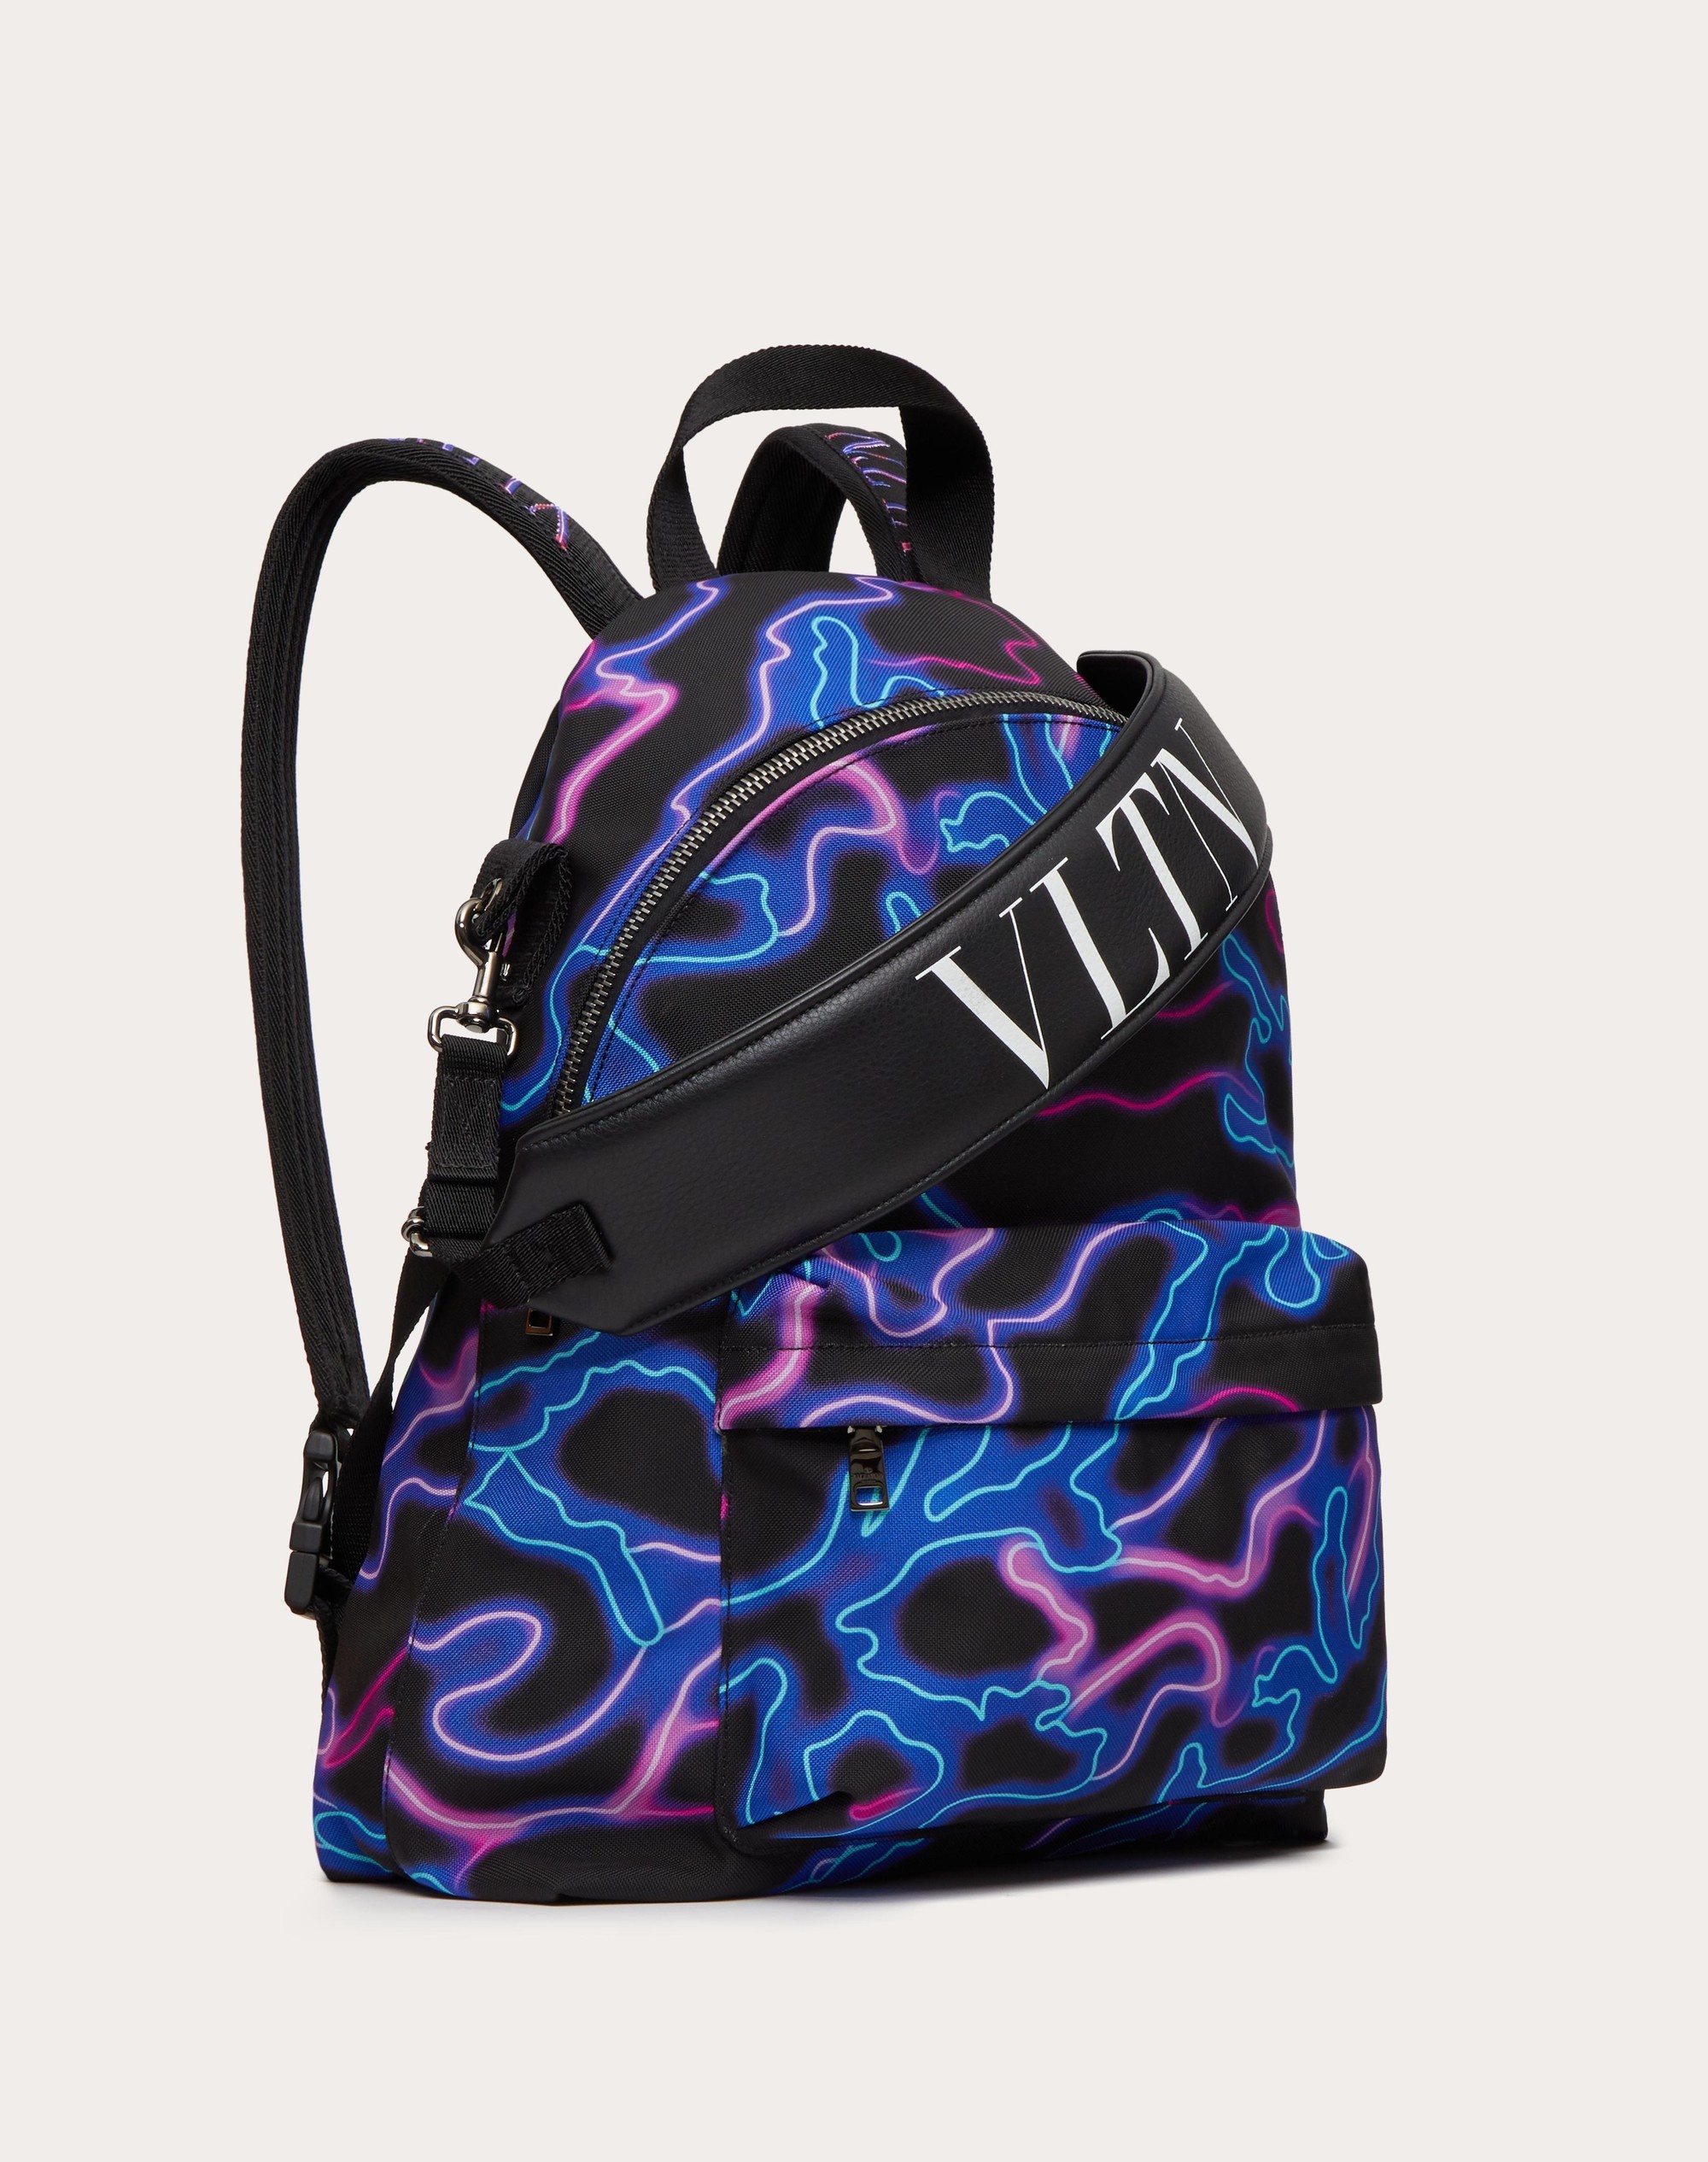 NEON CAMOU BACKPACK IN NYLON - 2